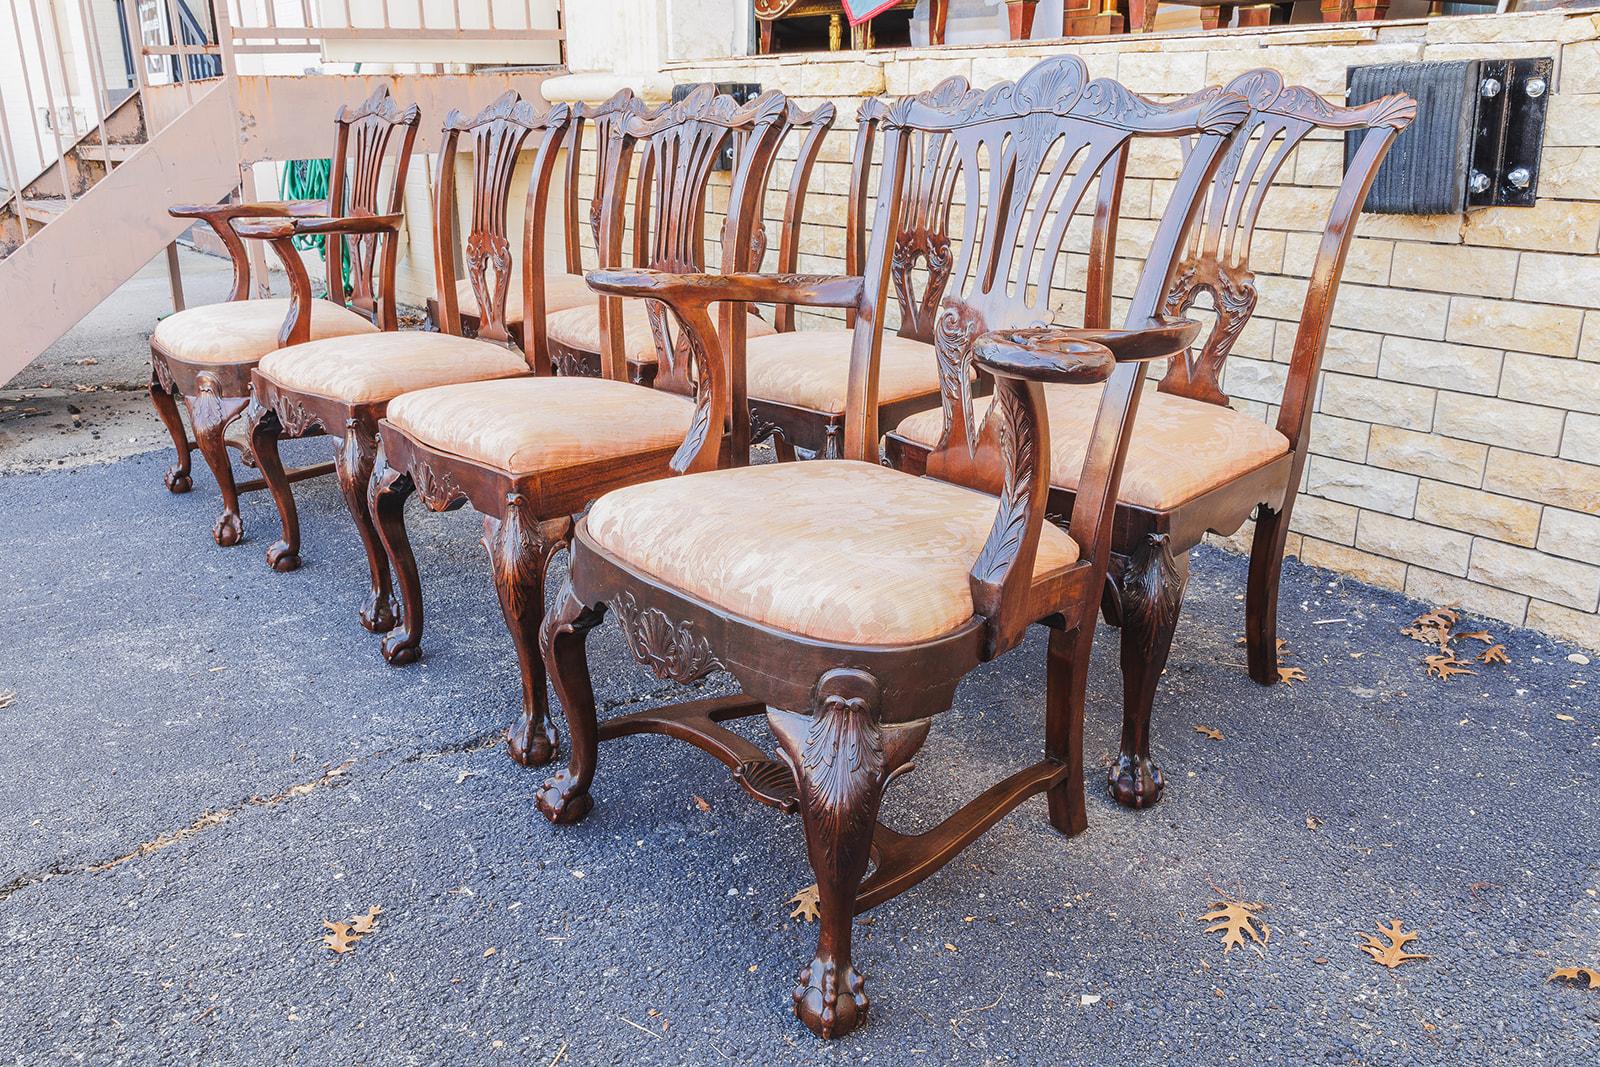 A fine set of 19th c  8 Irish Chippendale finely carved dining chairs. Comprising of 2 heavily carved arms and 6 sides. These chairs are heavily carved with fine eagle heads on the arm chairs and ball and claw feet.  The butler family produced fine